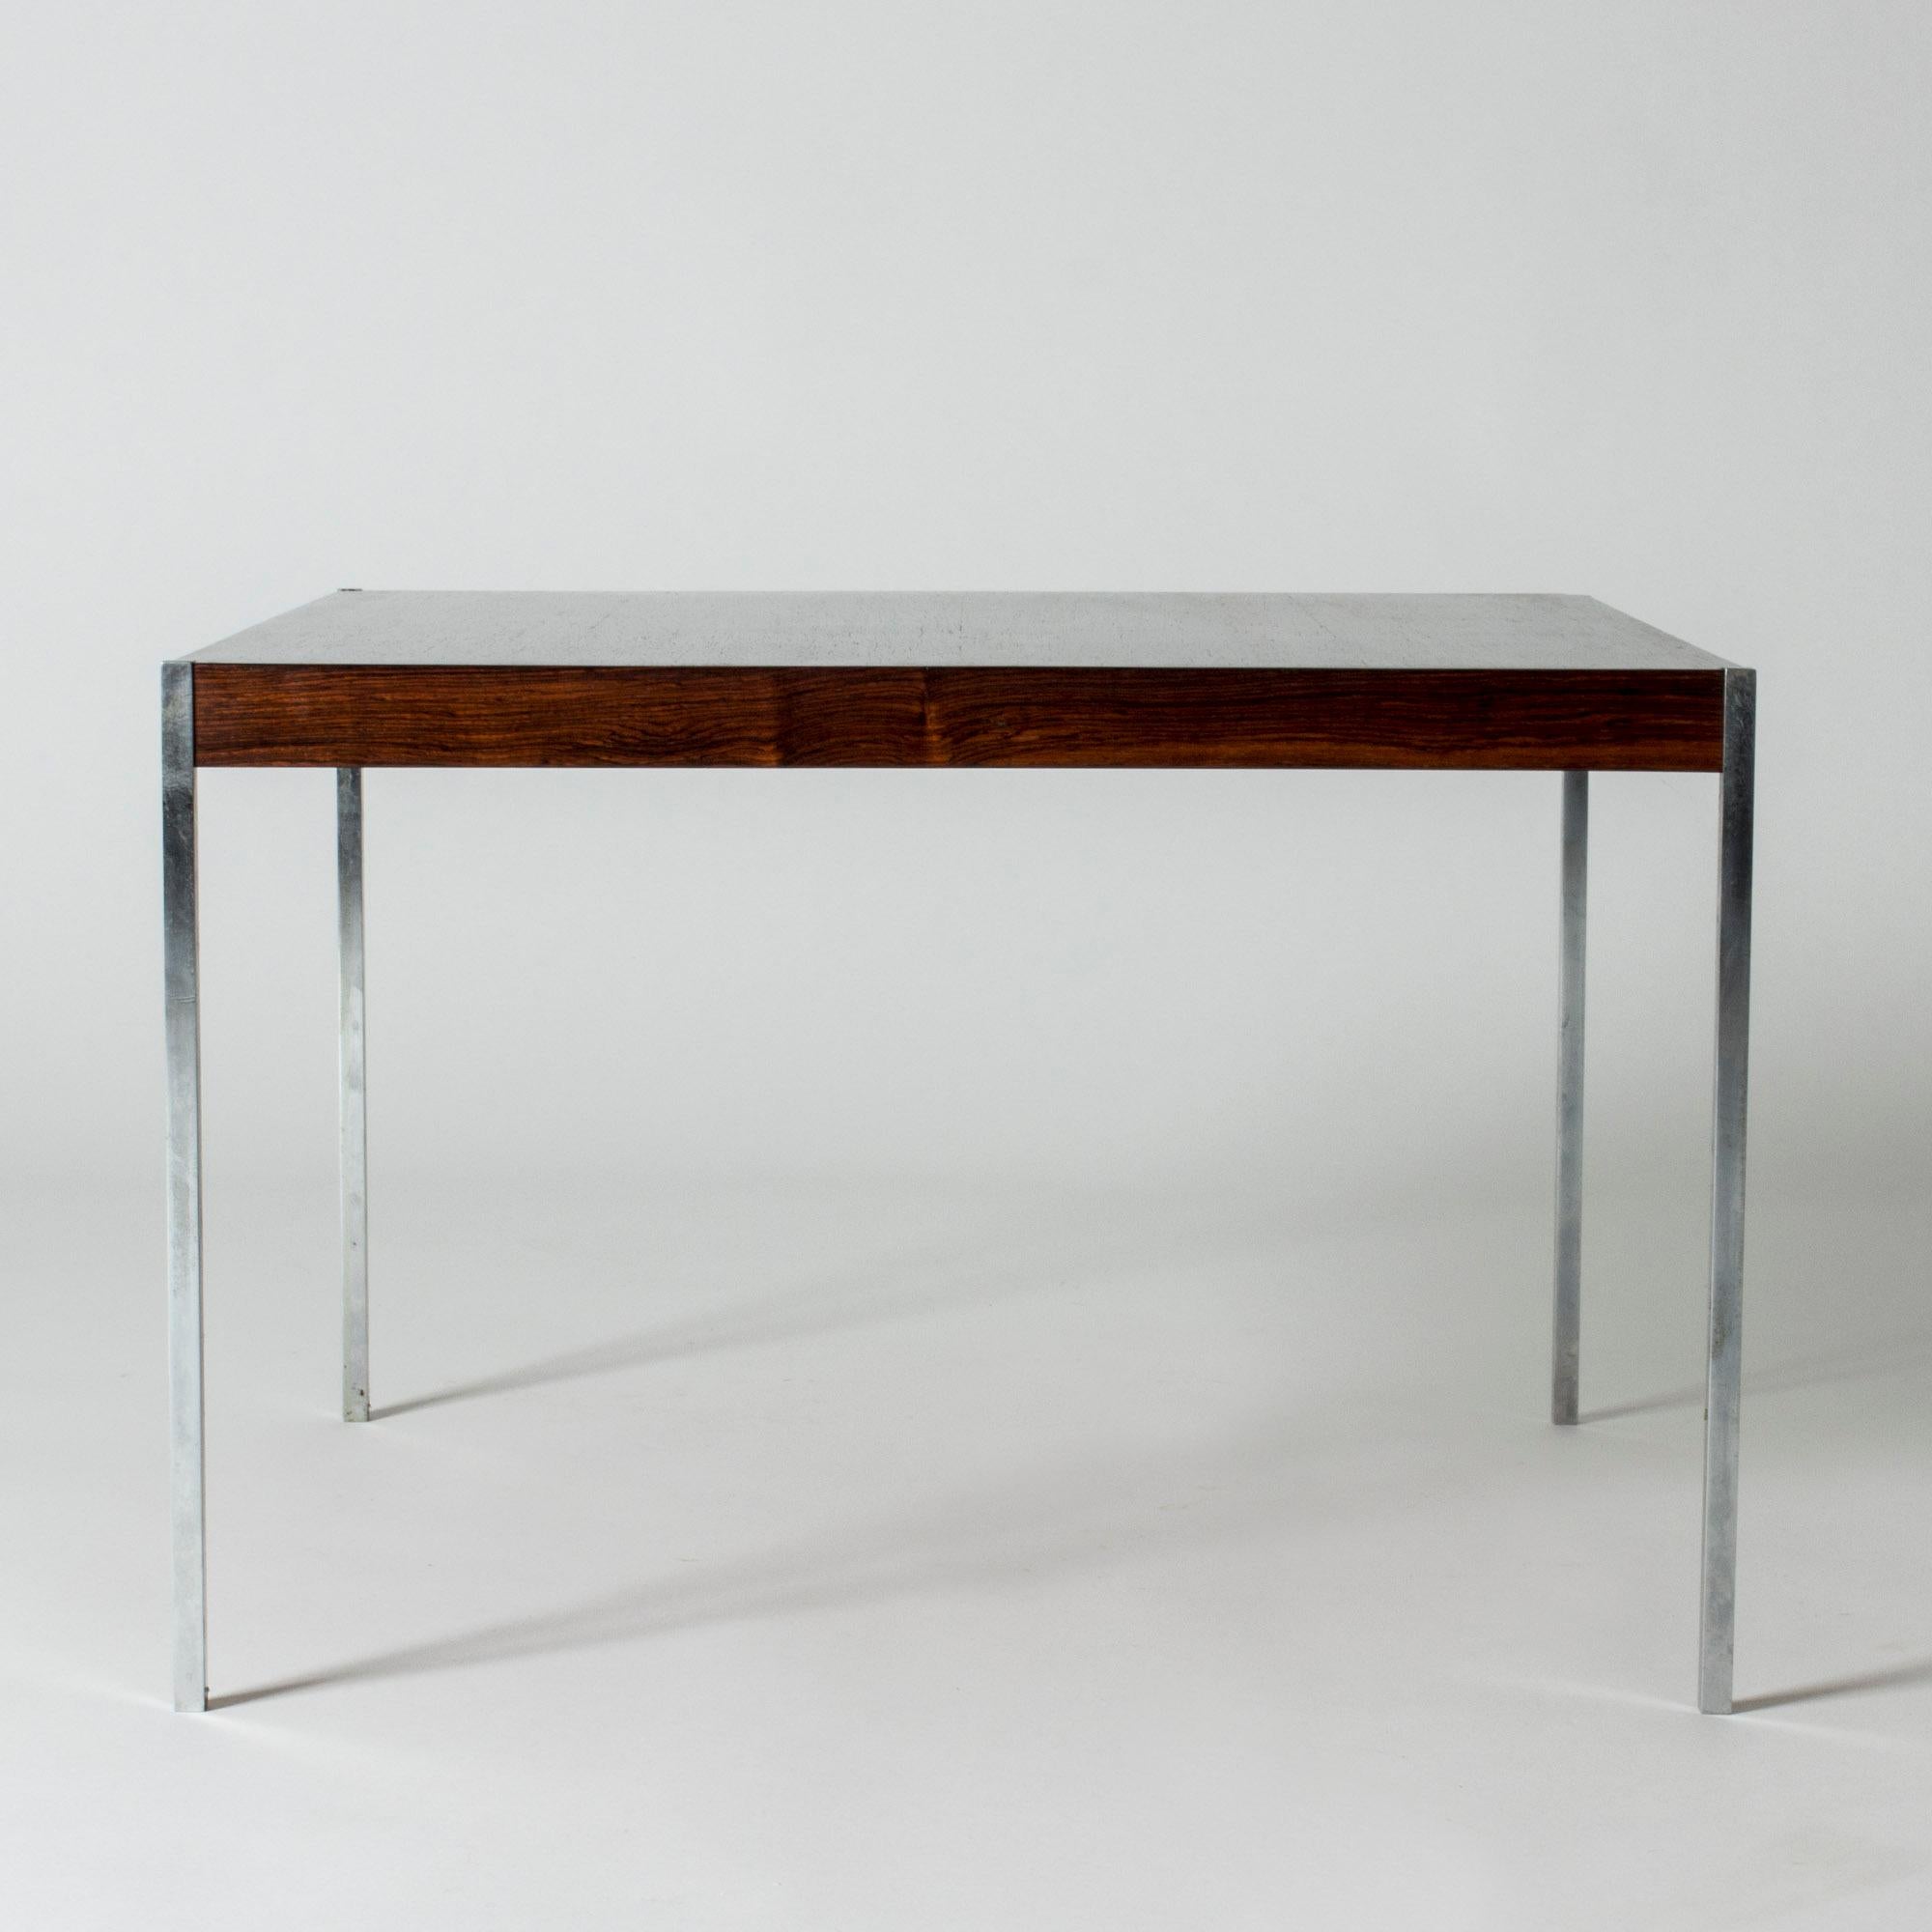 Neat rosewood side or small coffee table by Uno and Östen Kristiansson. Sleek, clean lines, with slender steel legs. The top squares of the legs make cool details at the corners of the tabletop.